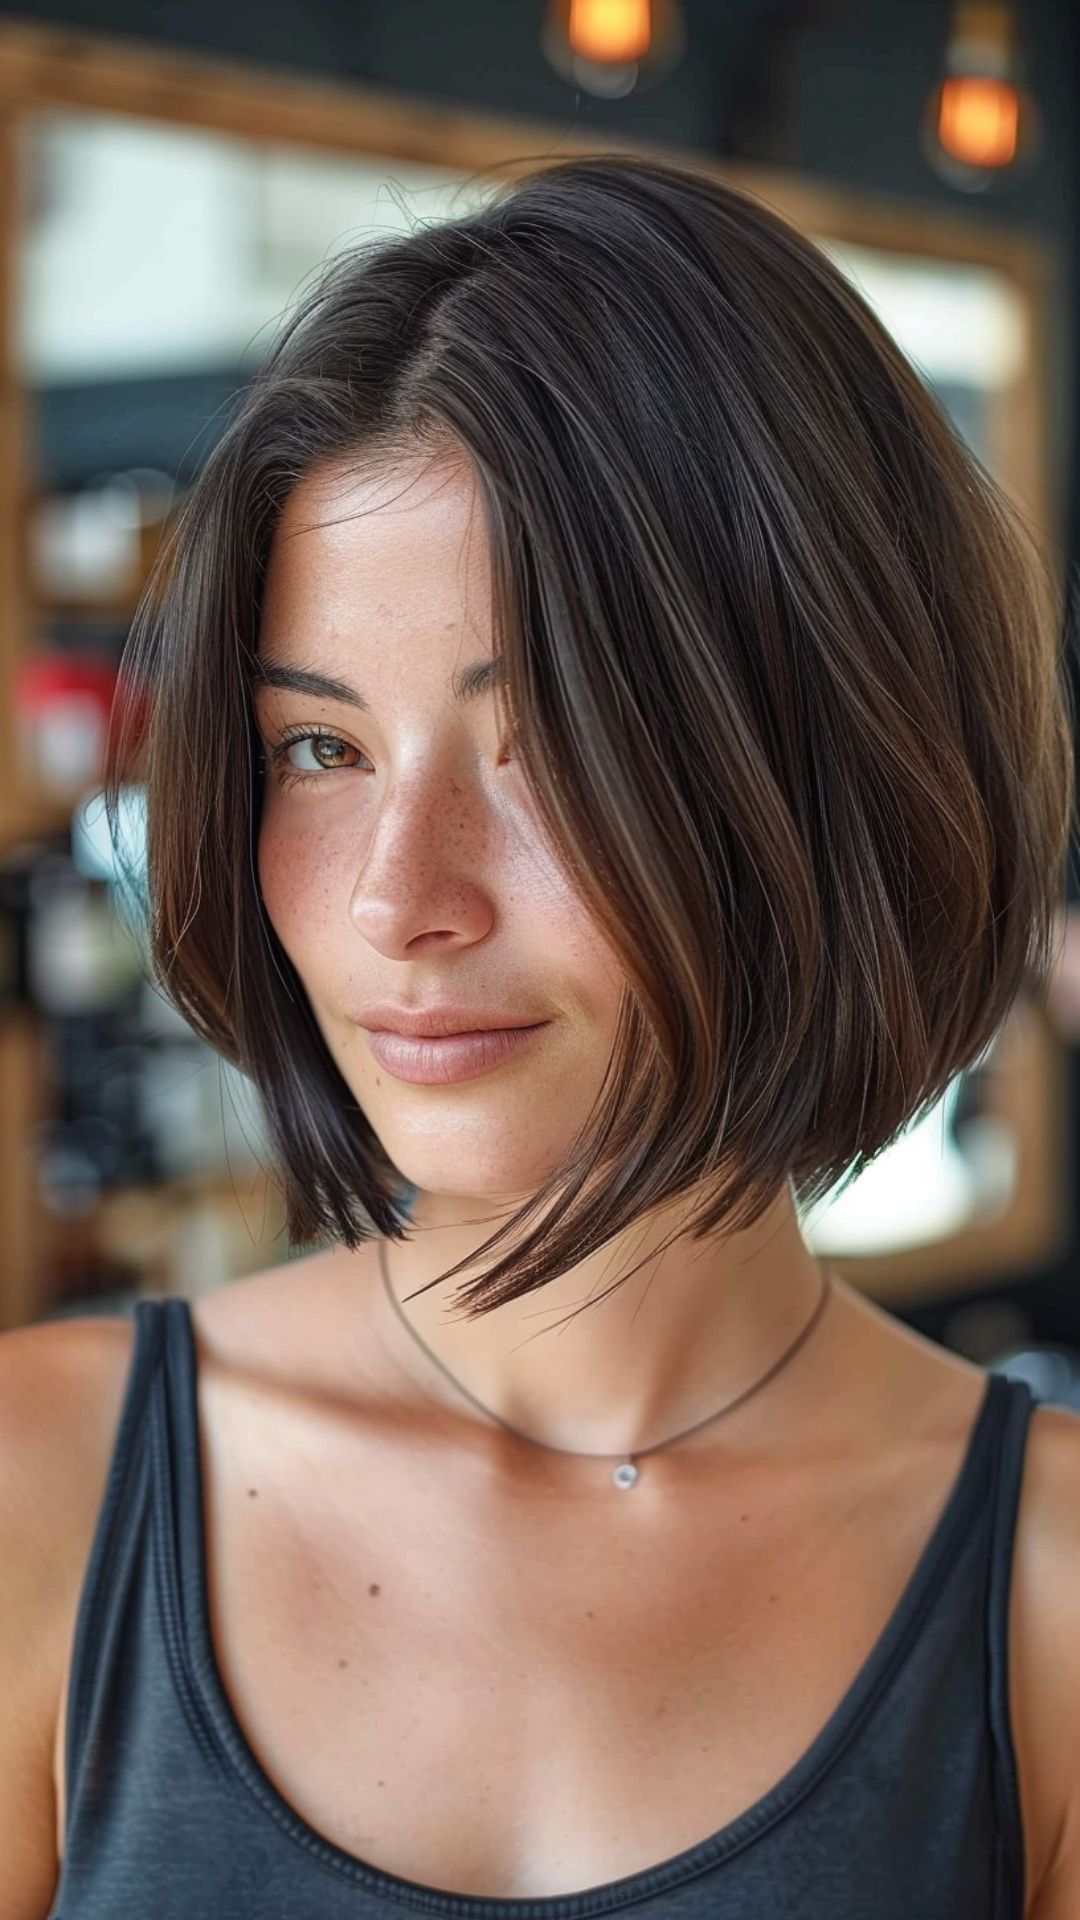 Stylish Short Hairstyles for Round Faces to Enhance Your Features